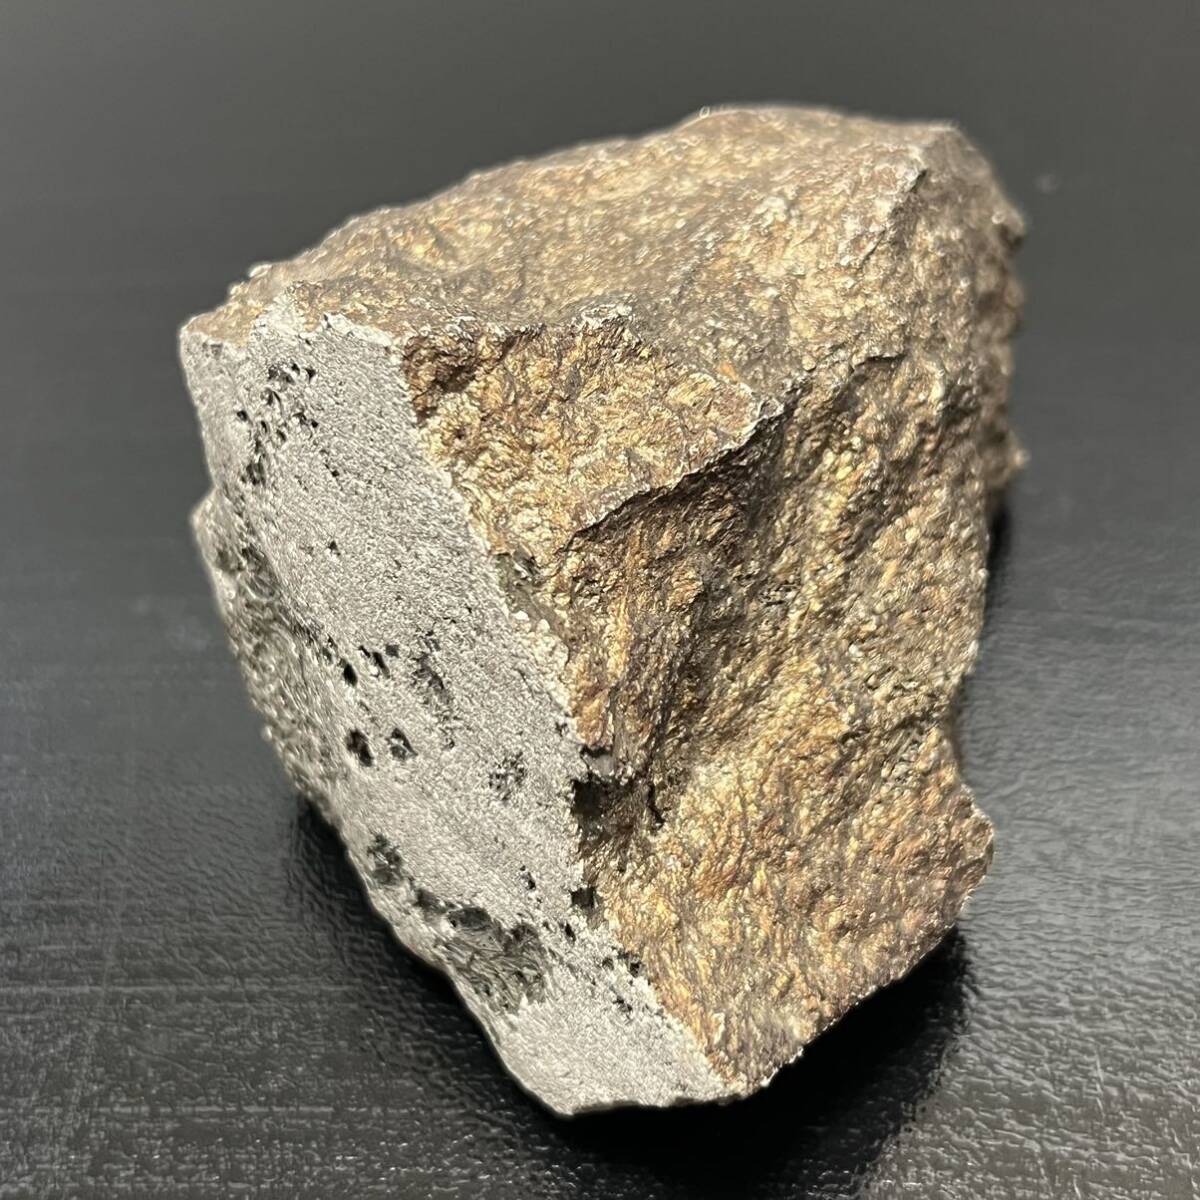  meteor light . stone 963.5g Power Stone magnet ... attaching. raw ore mineral 